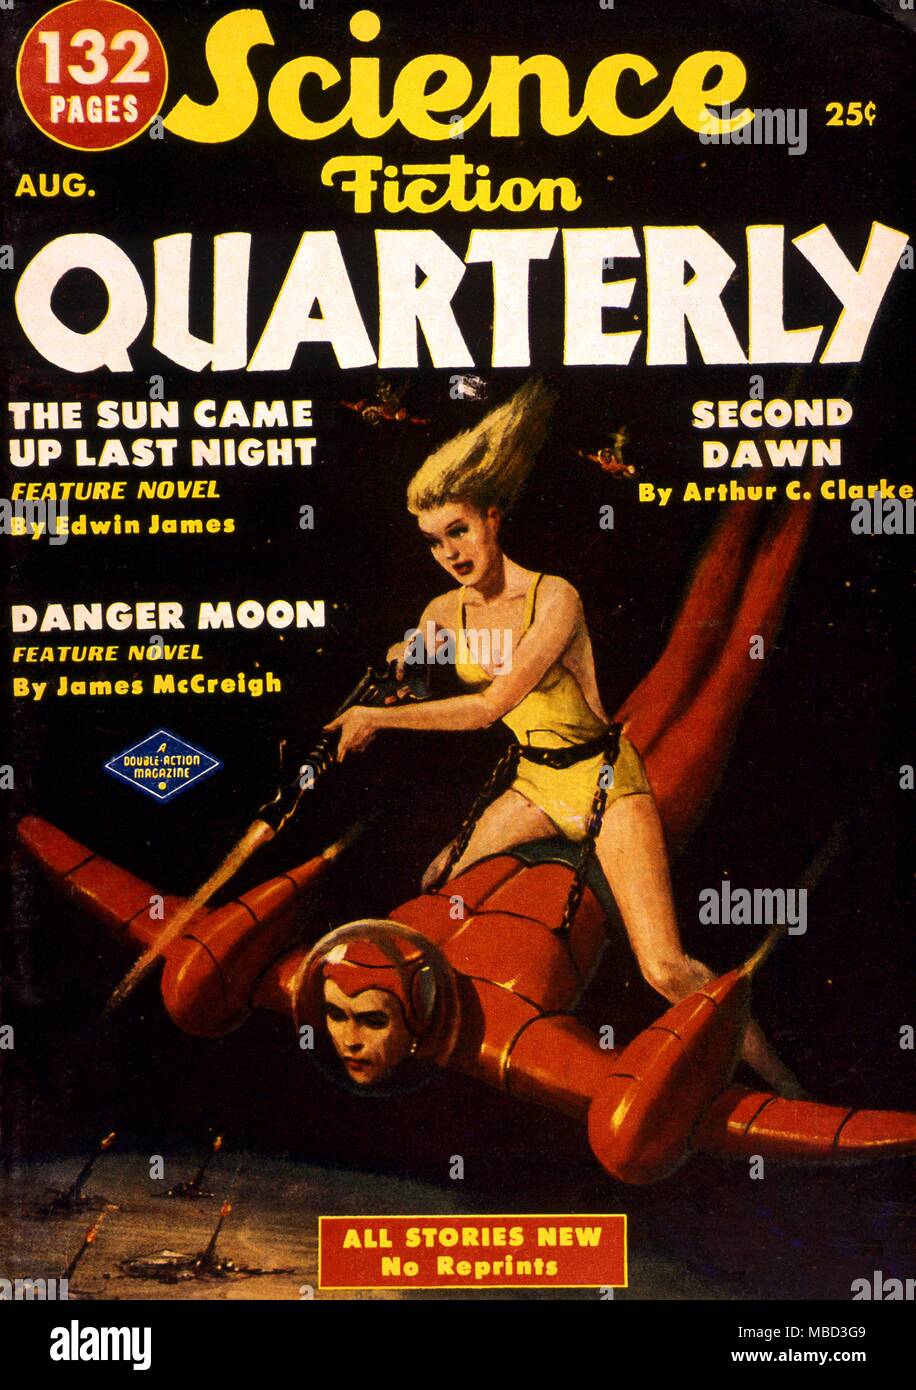 Science Fiction and Horror Magazines. 'Science Fiction Quarterly' Cover, August 1951. Artwork by Morey. Stock Photo